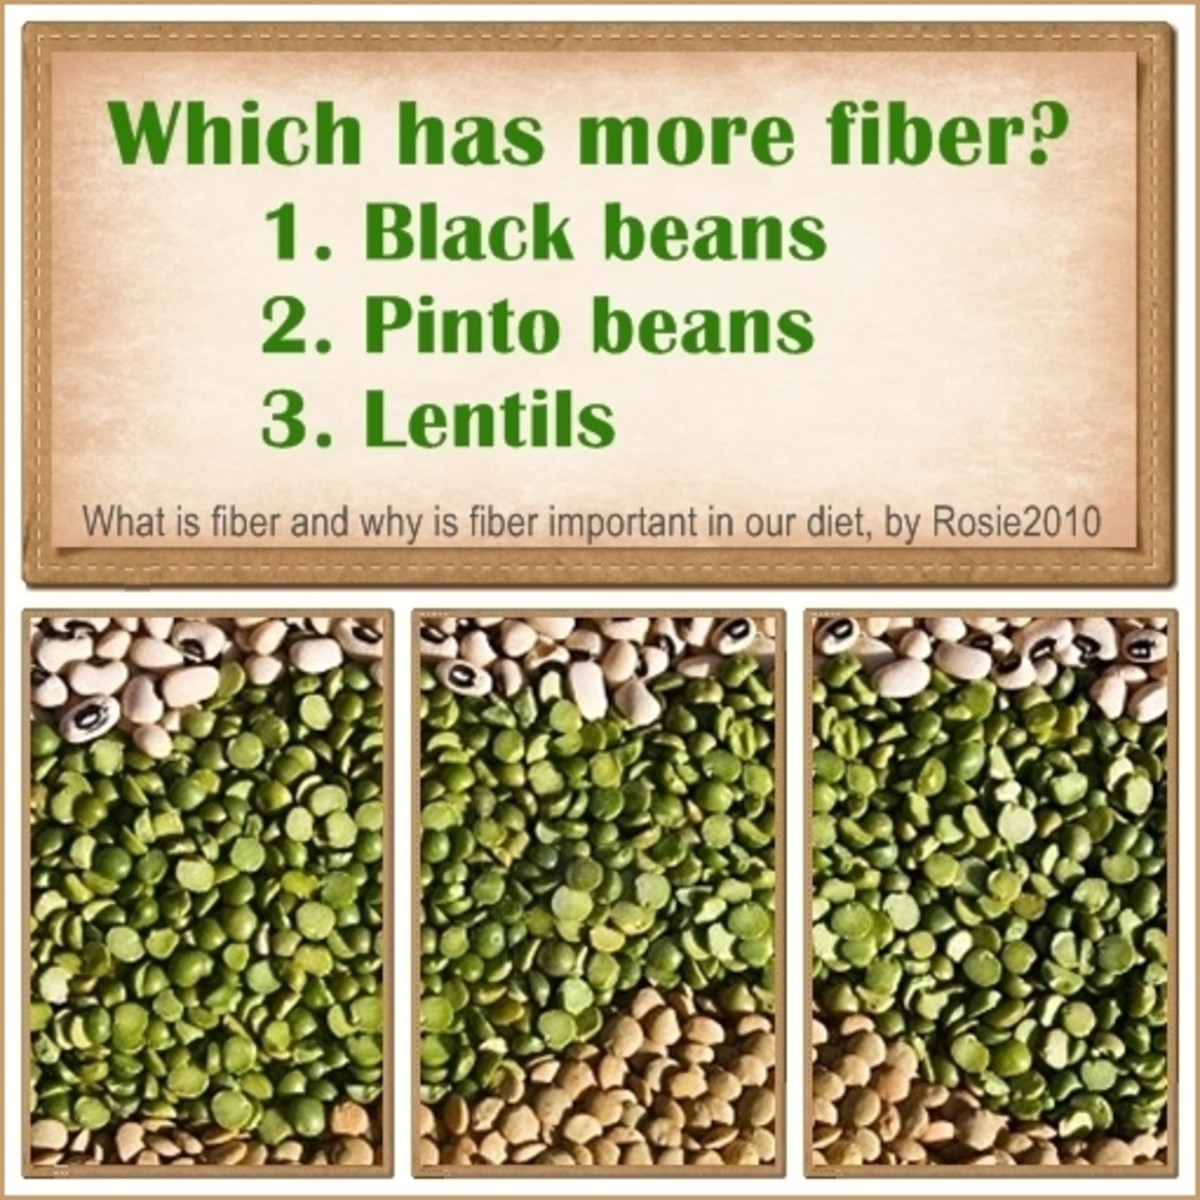 What is Fiber and Why is Fiber Important in our Diet, by Rosie2010 - Answer: #2 Pinto beans